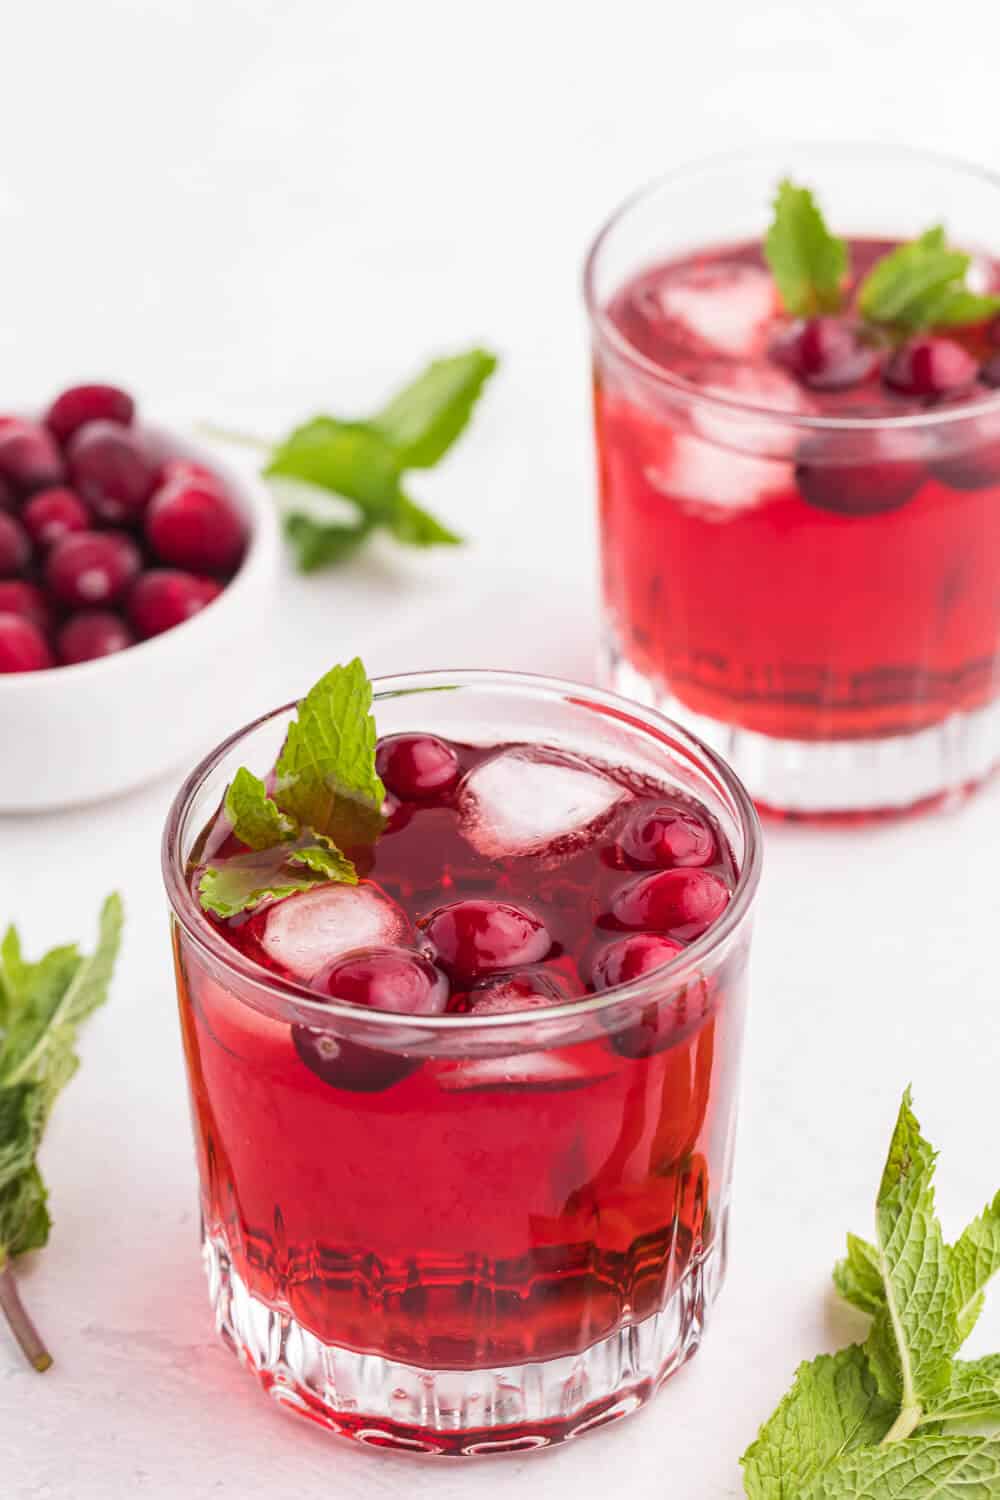 Cranberry Mint Mocktail - This mocktail is the perfect holiday party beverage. The red cranberries and green mint echo the colours of the season, with a sweet, refreshing and bubbly tang!